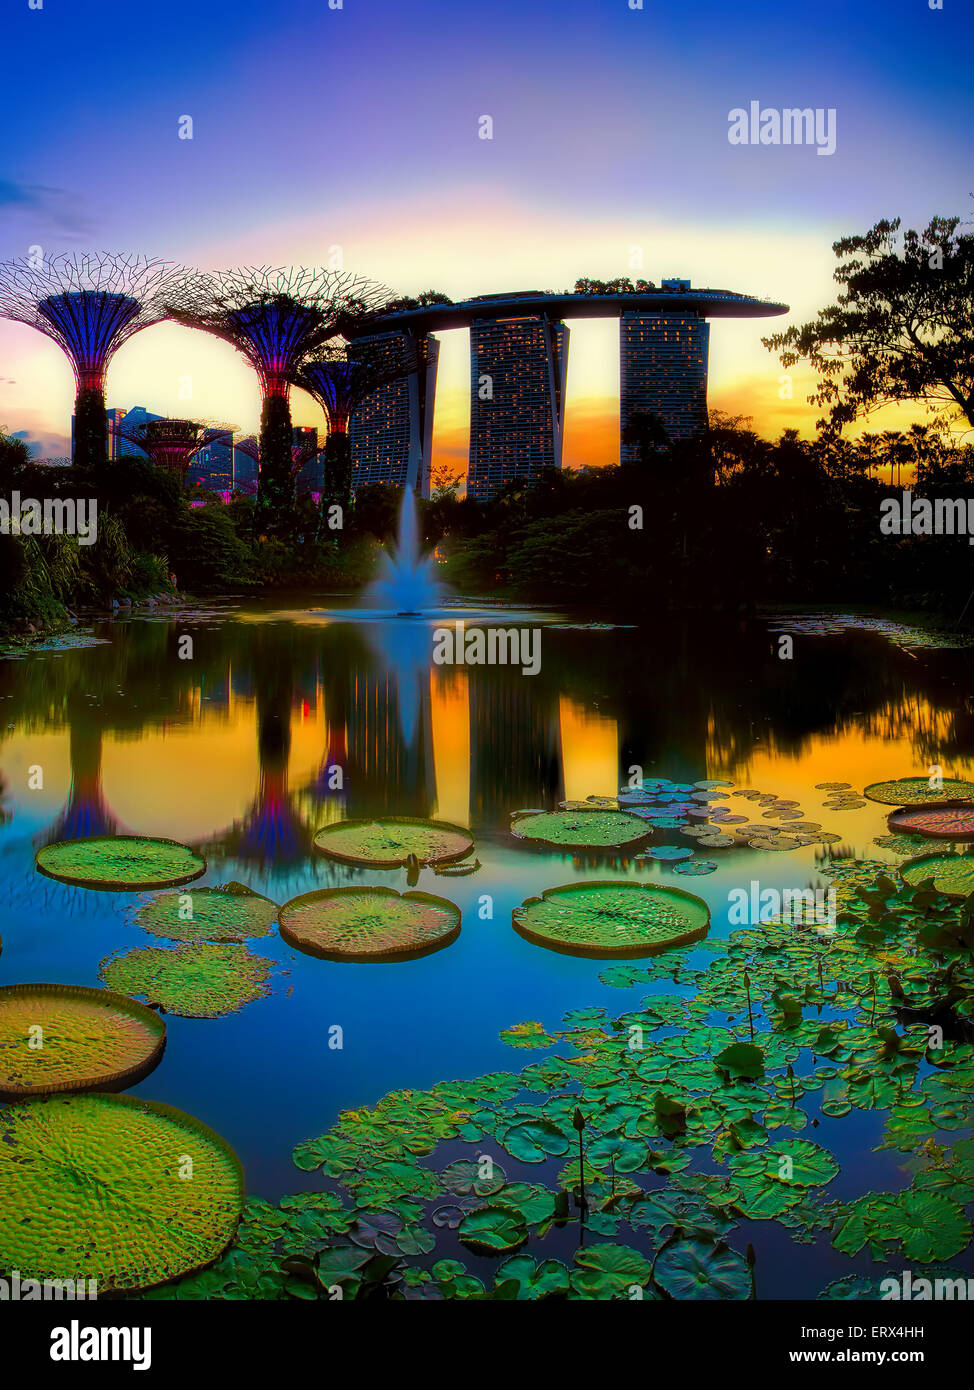 SINGAPORE-JUN 07: Evening view of Water Lily pond, and Marina Bay Sands at Gardens by the Bay on Jun 07, 2015 in Singapore. Stock Photo